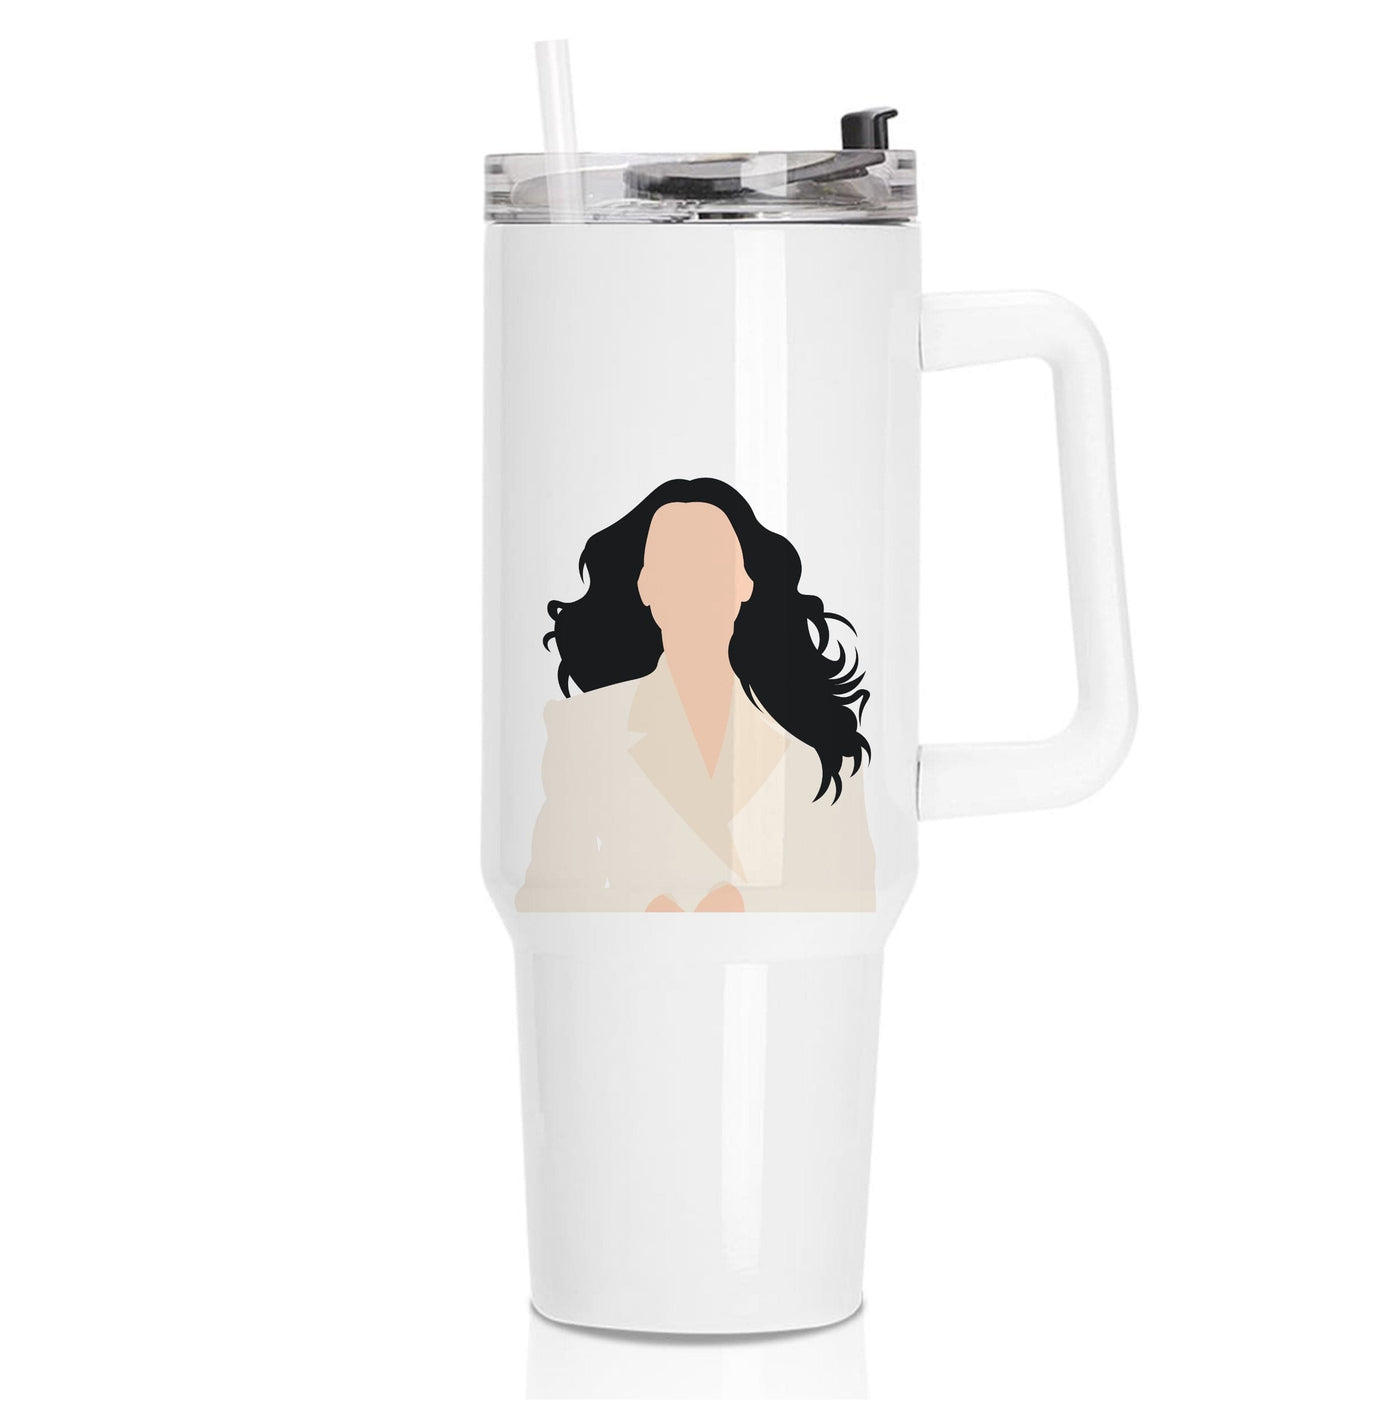 Her - Katy Perry Tumbler